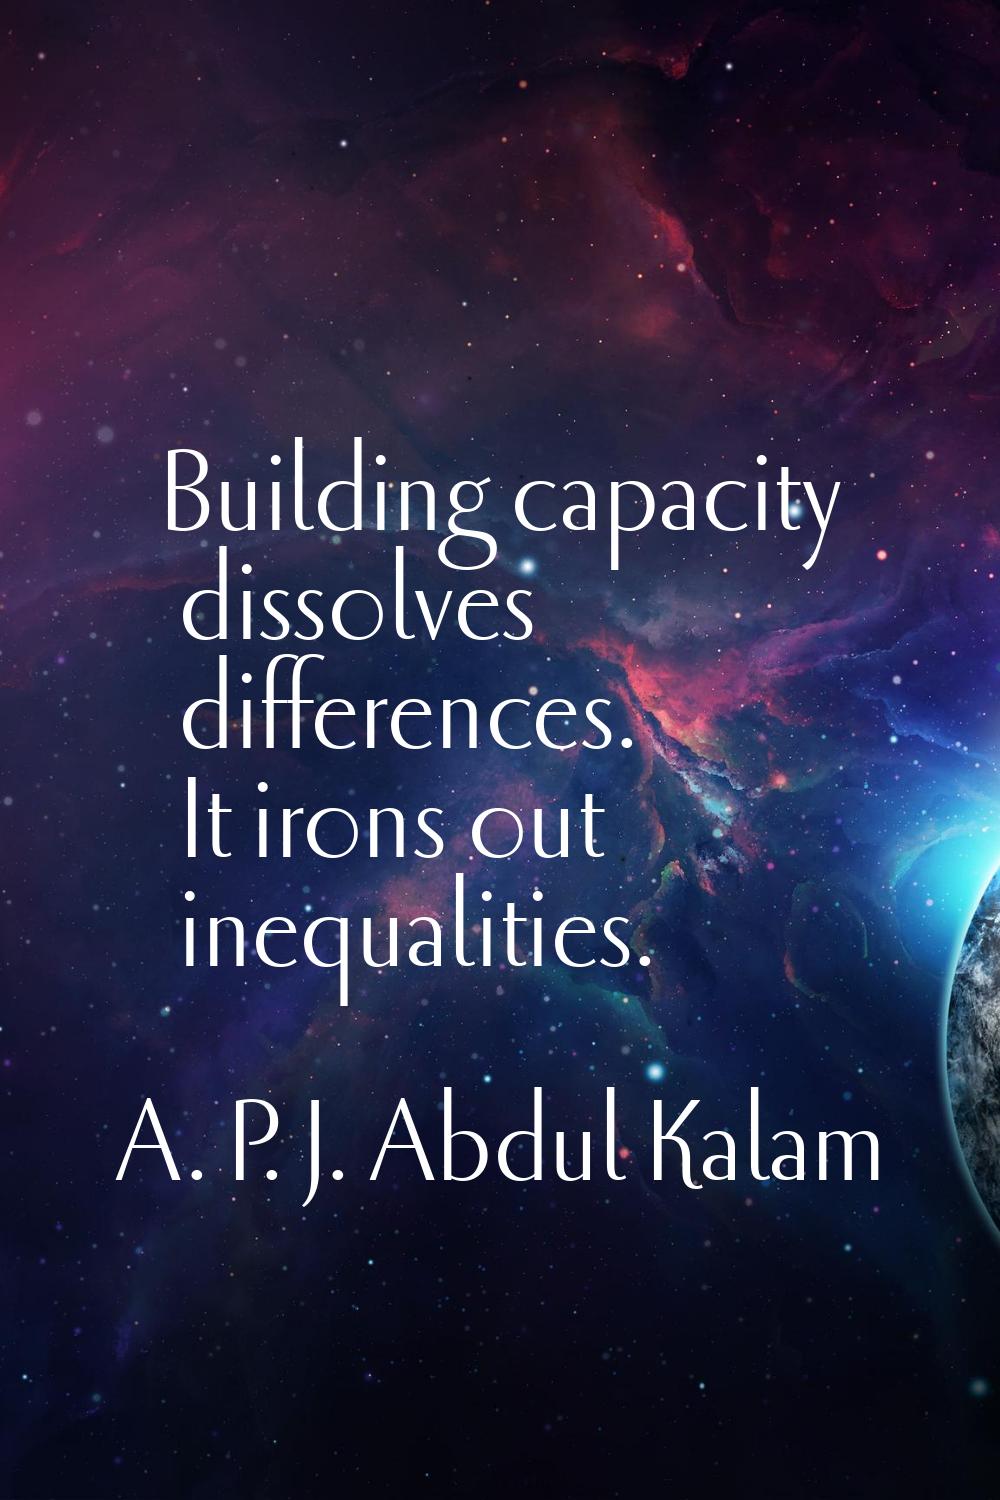 Building capacity dissolves differences. It irons out inequalities.